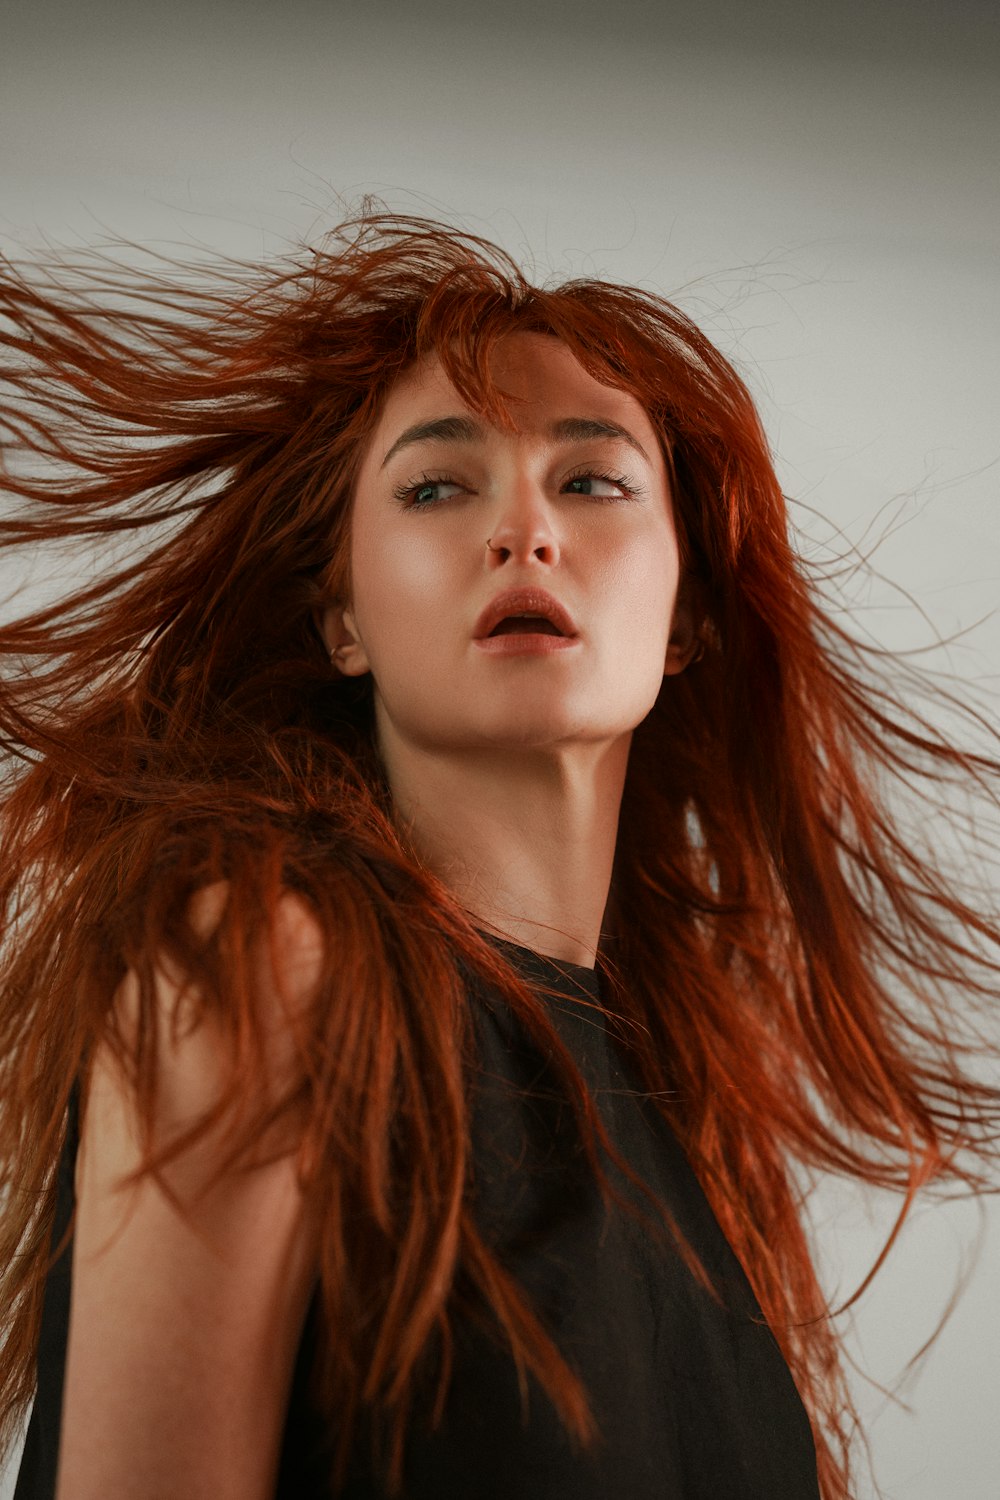 a woman with red hair blowing in the wind